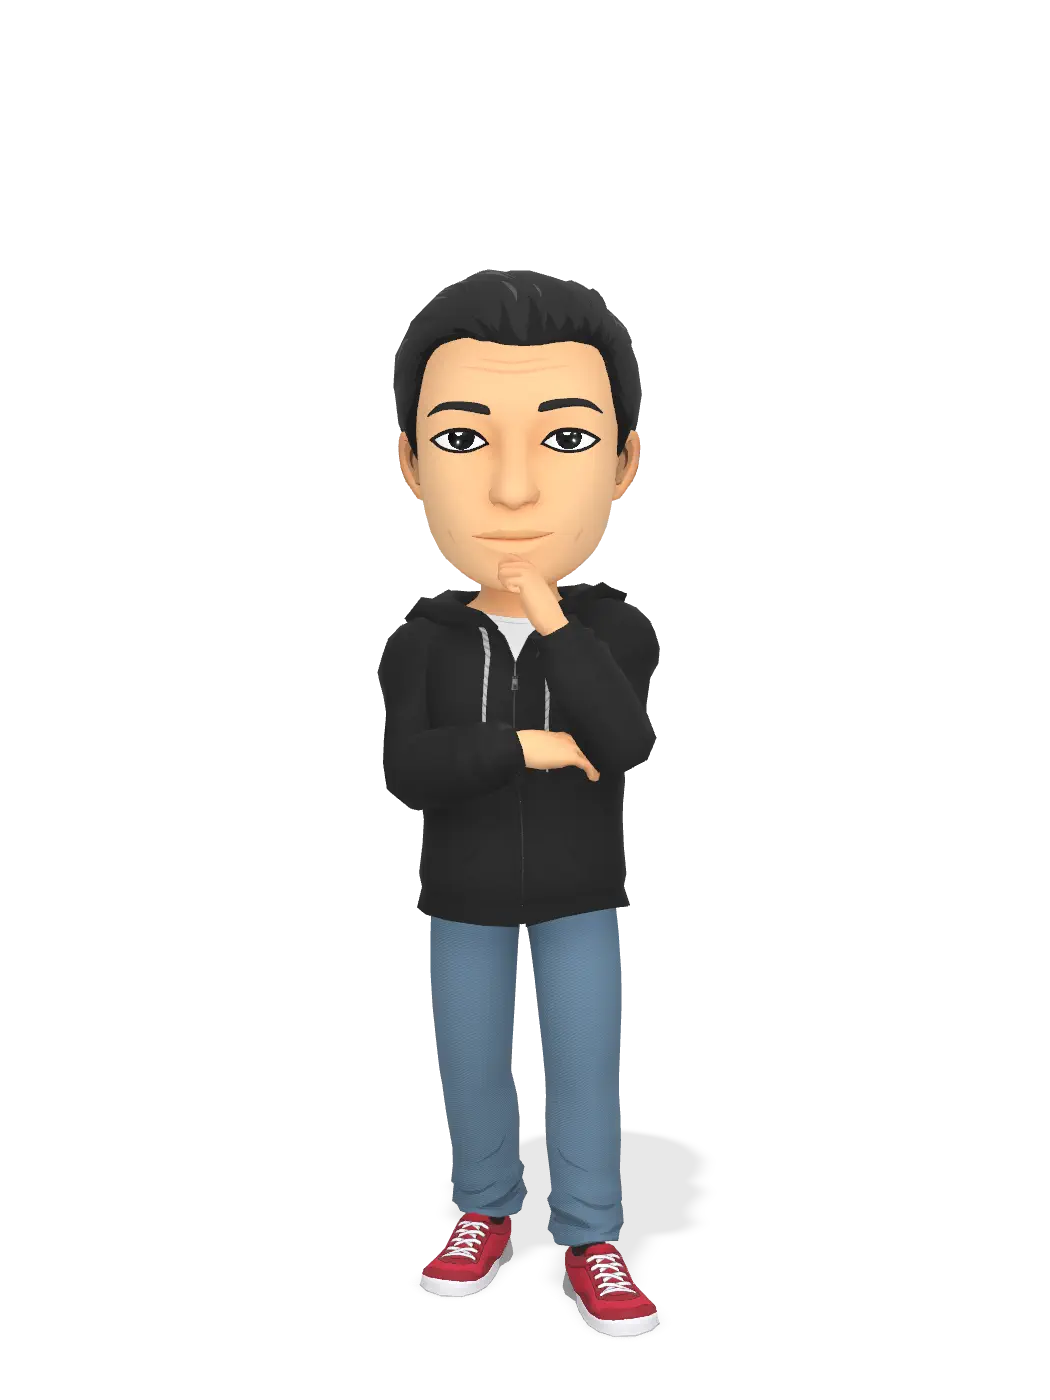 3D Bitmoji for over9000_taing